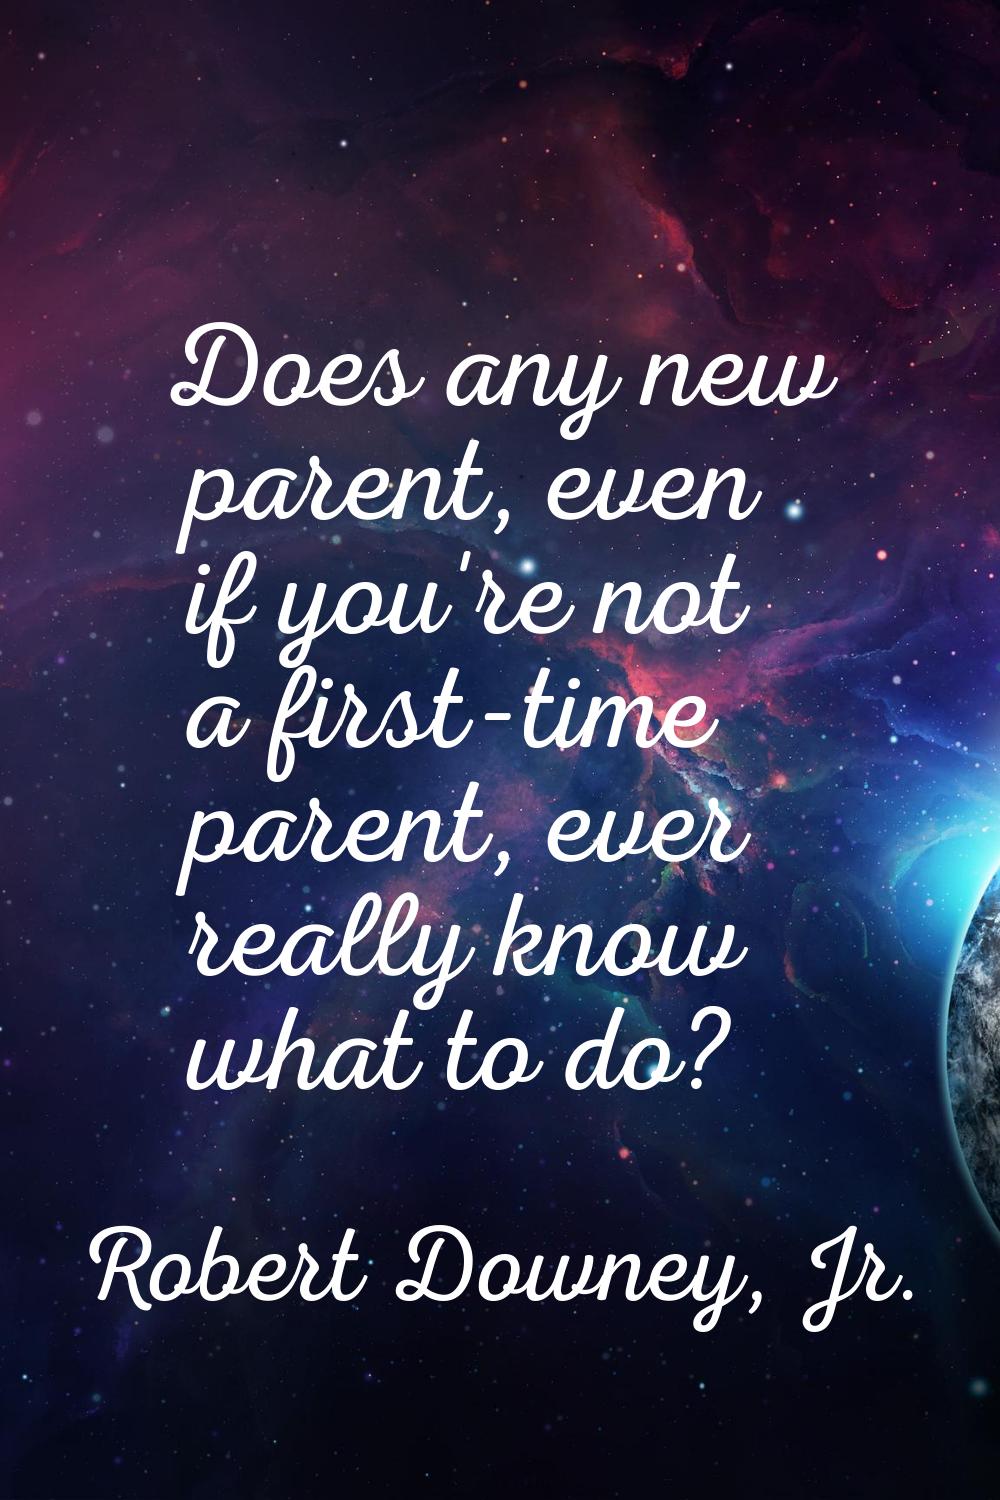 Does any new parent, even if you're not a first-time parent, ever really know what to do?